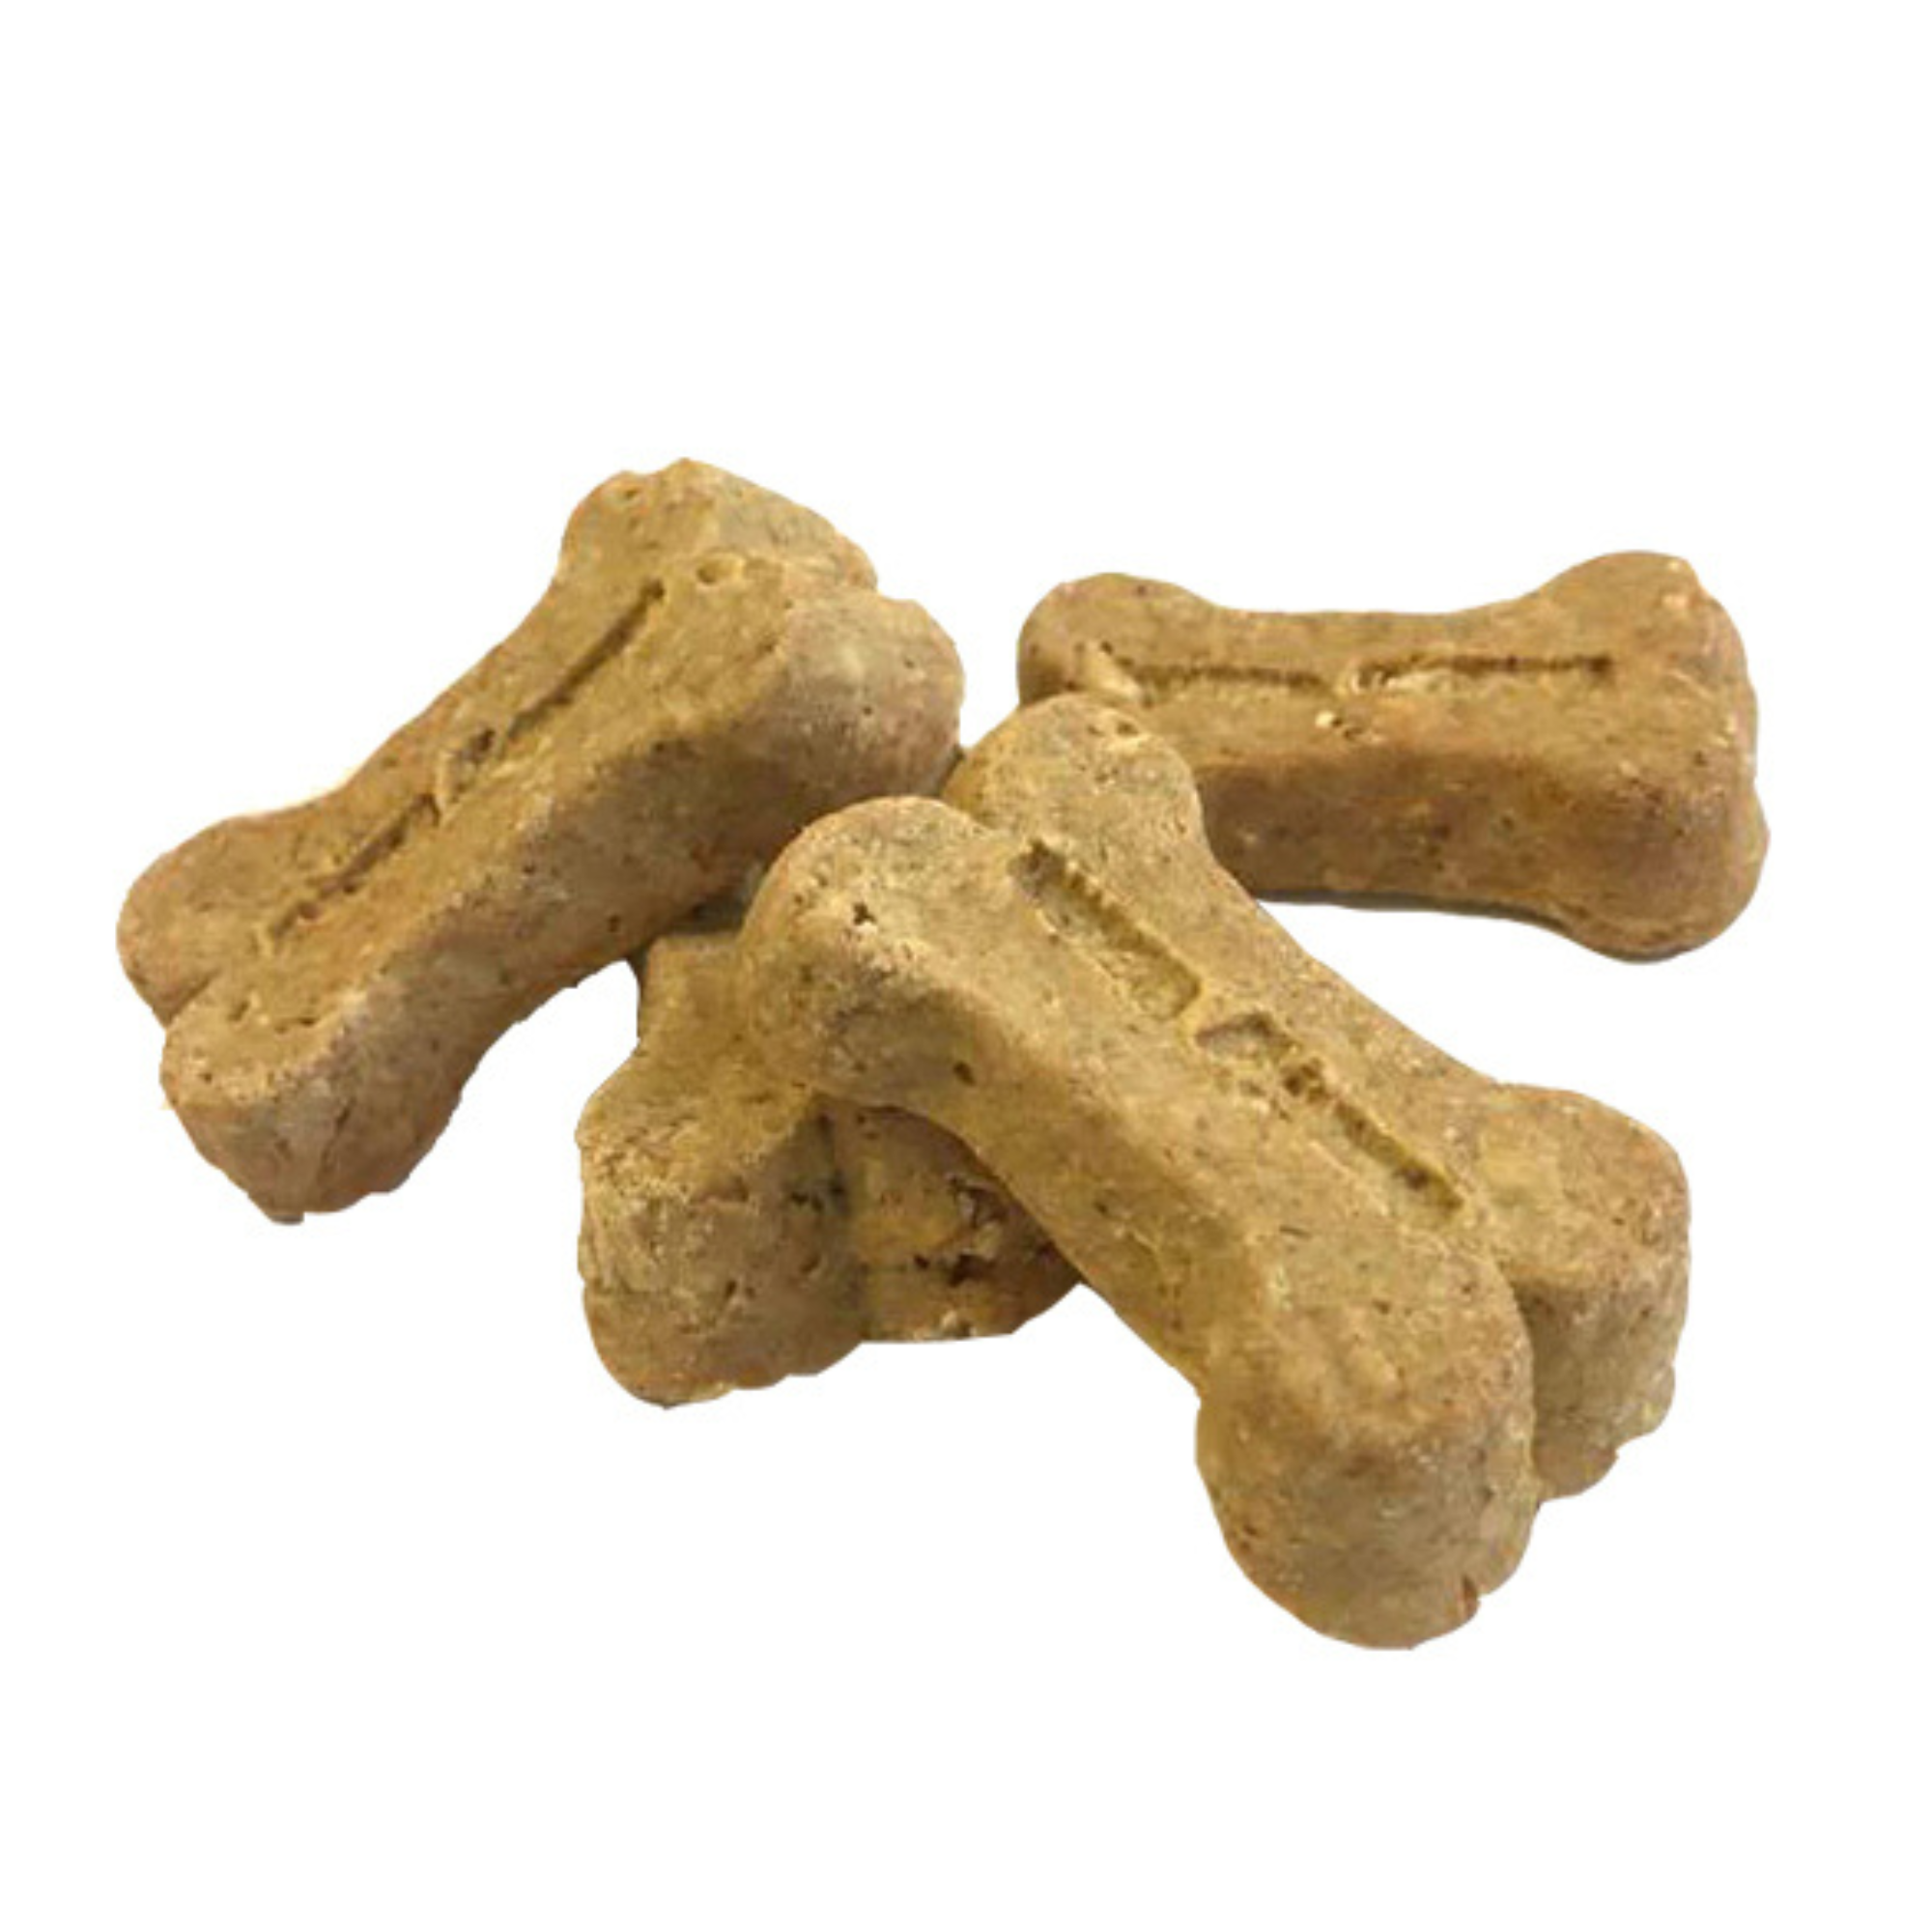 Healthy Hound Products Dexter's Picnic Mix Biscuits